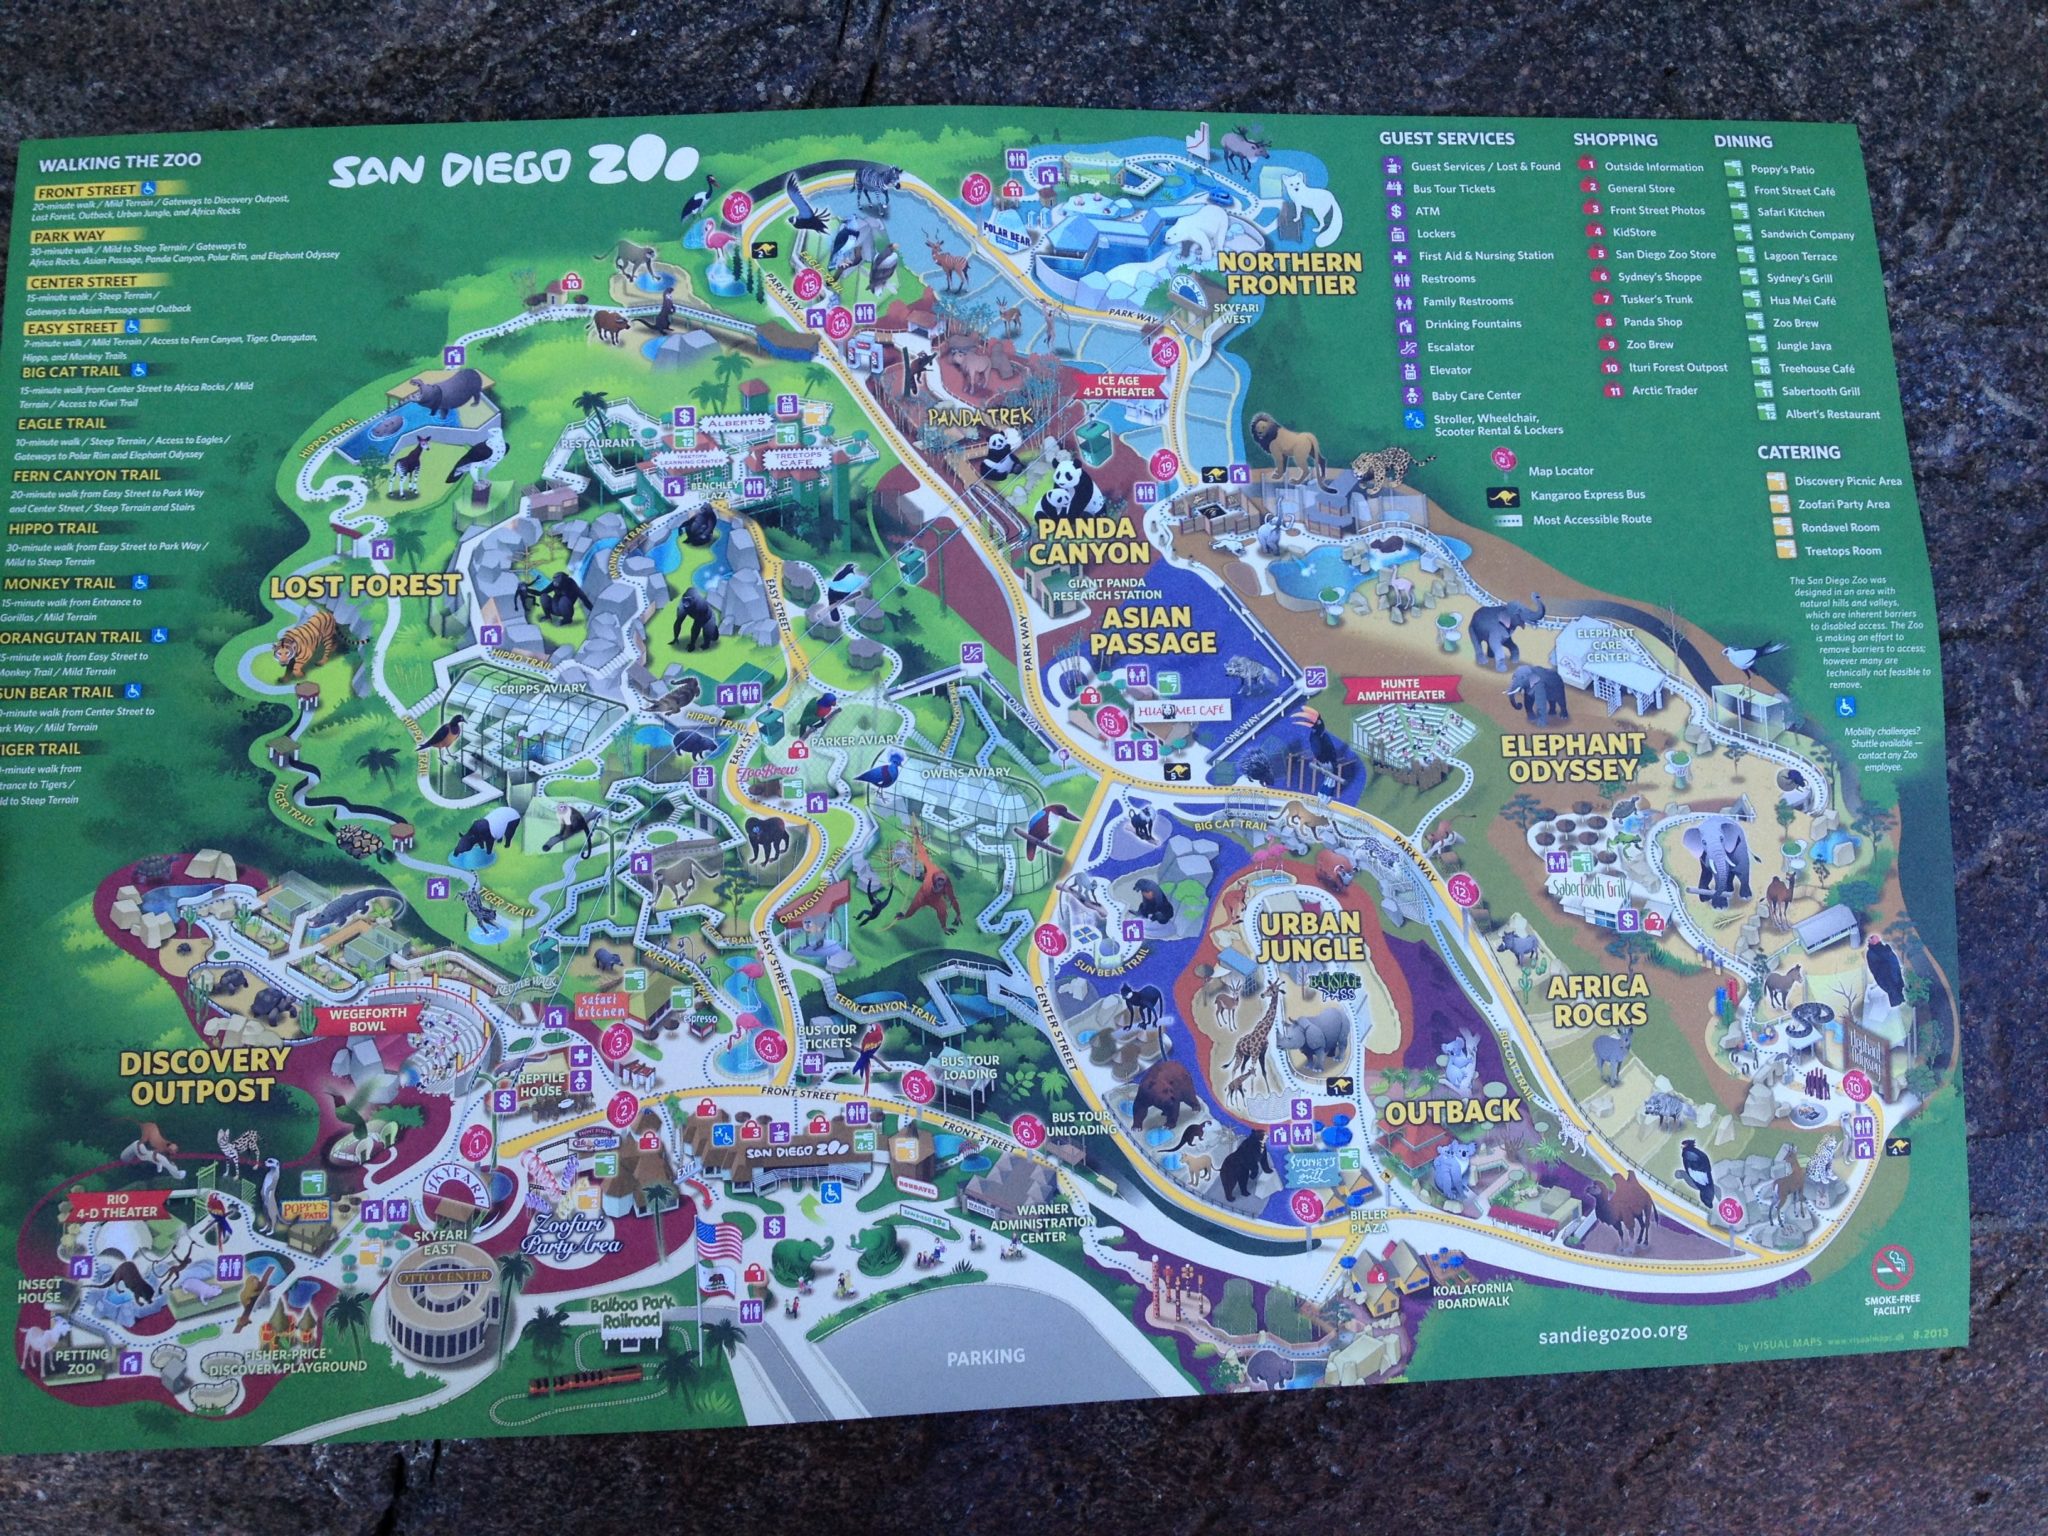 San Diego Zoo map. You get maps right by the entrance to the zoo.